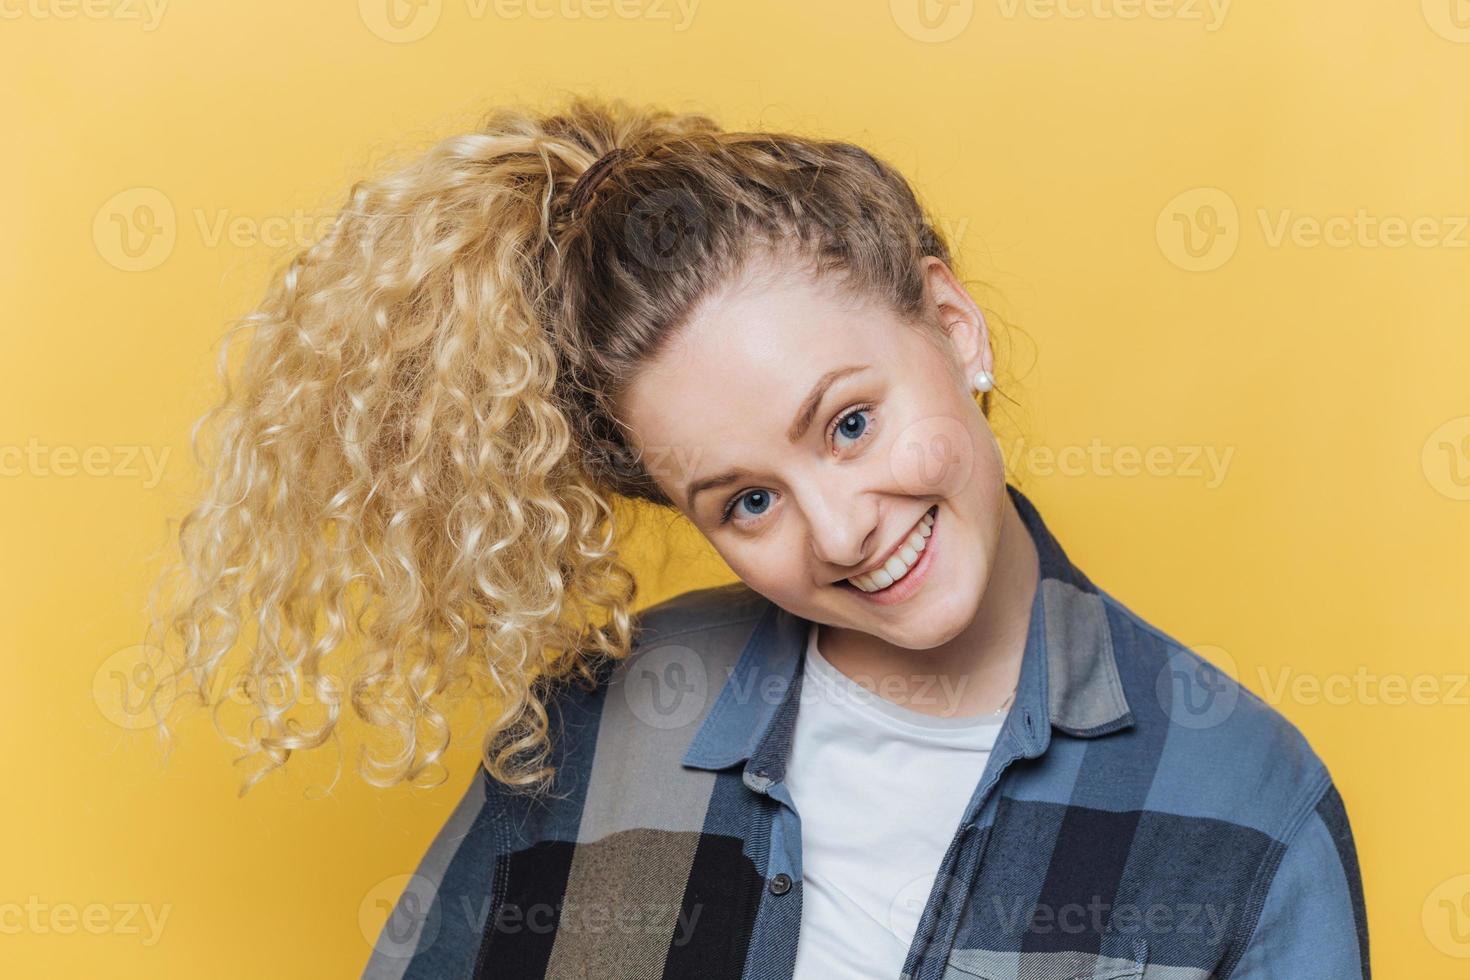 Funny cute female model with curly blonde pony tail, has positive smile, has fun alone indoor against yellow background, wears casual checkered shirt, being in good mood. Facial expressions. photo